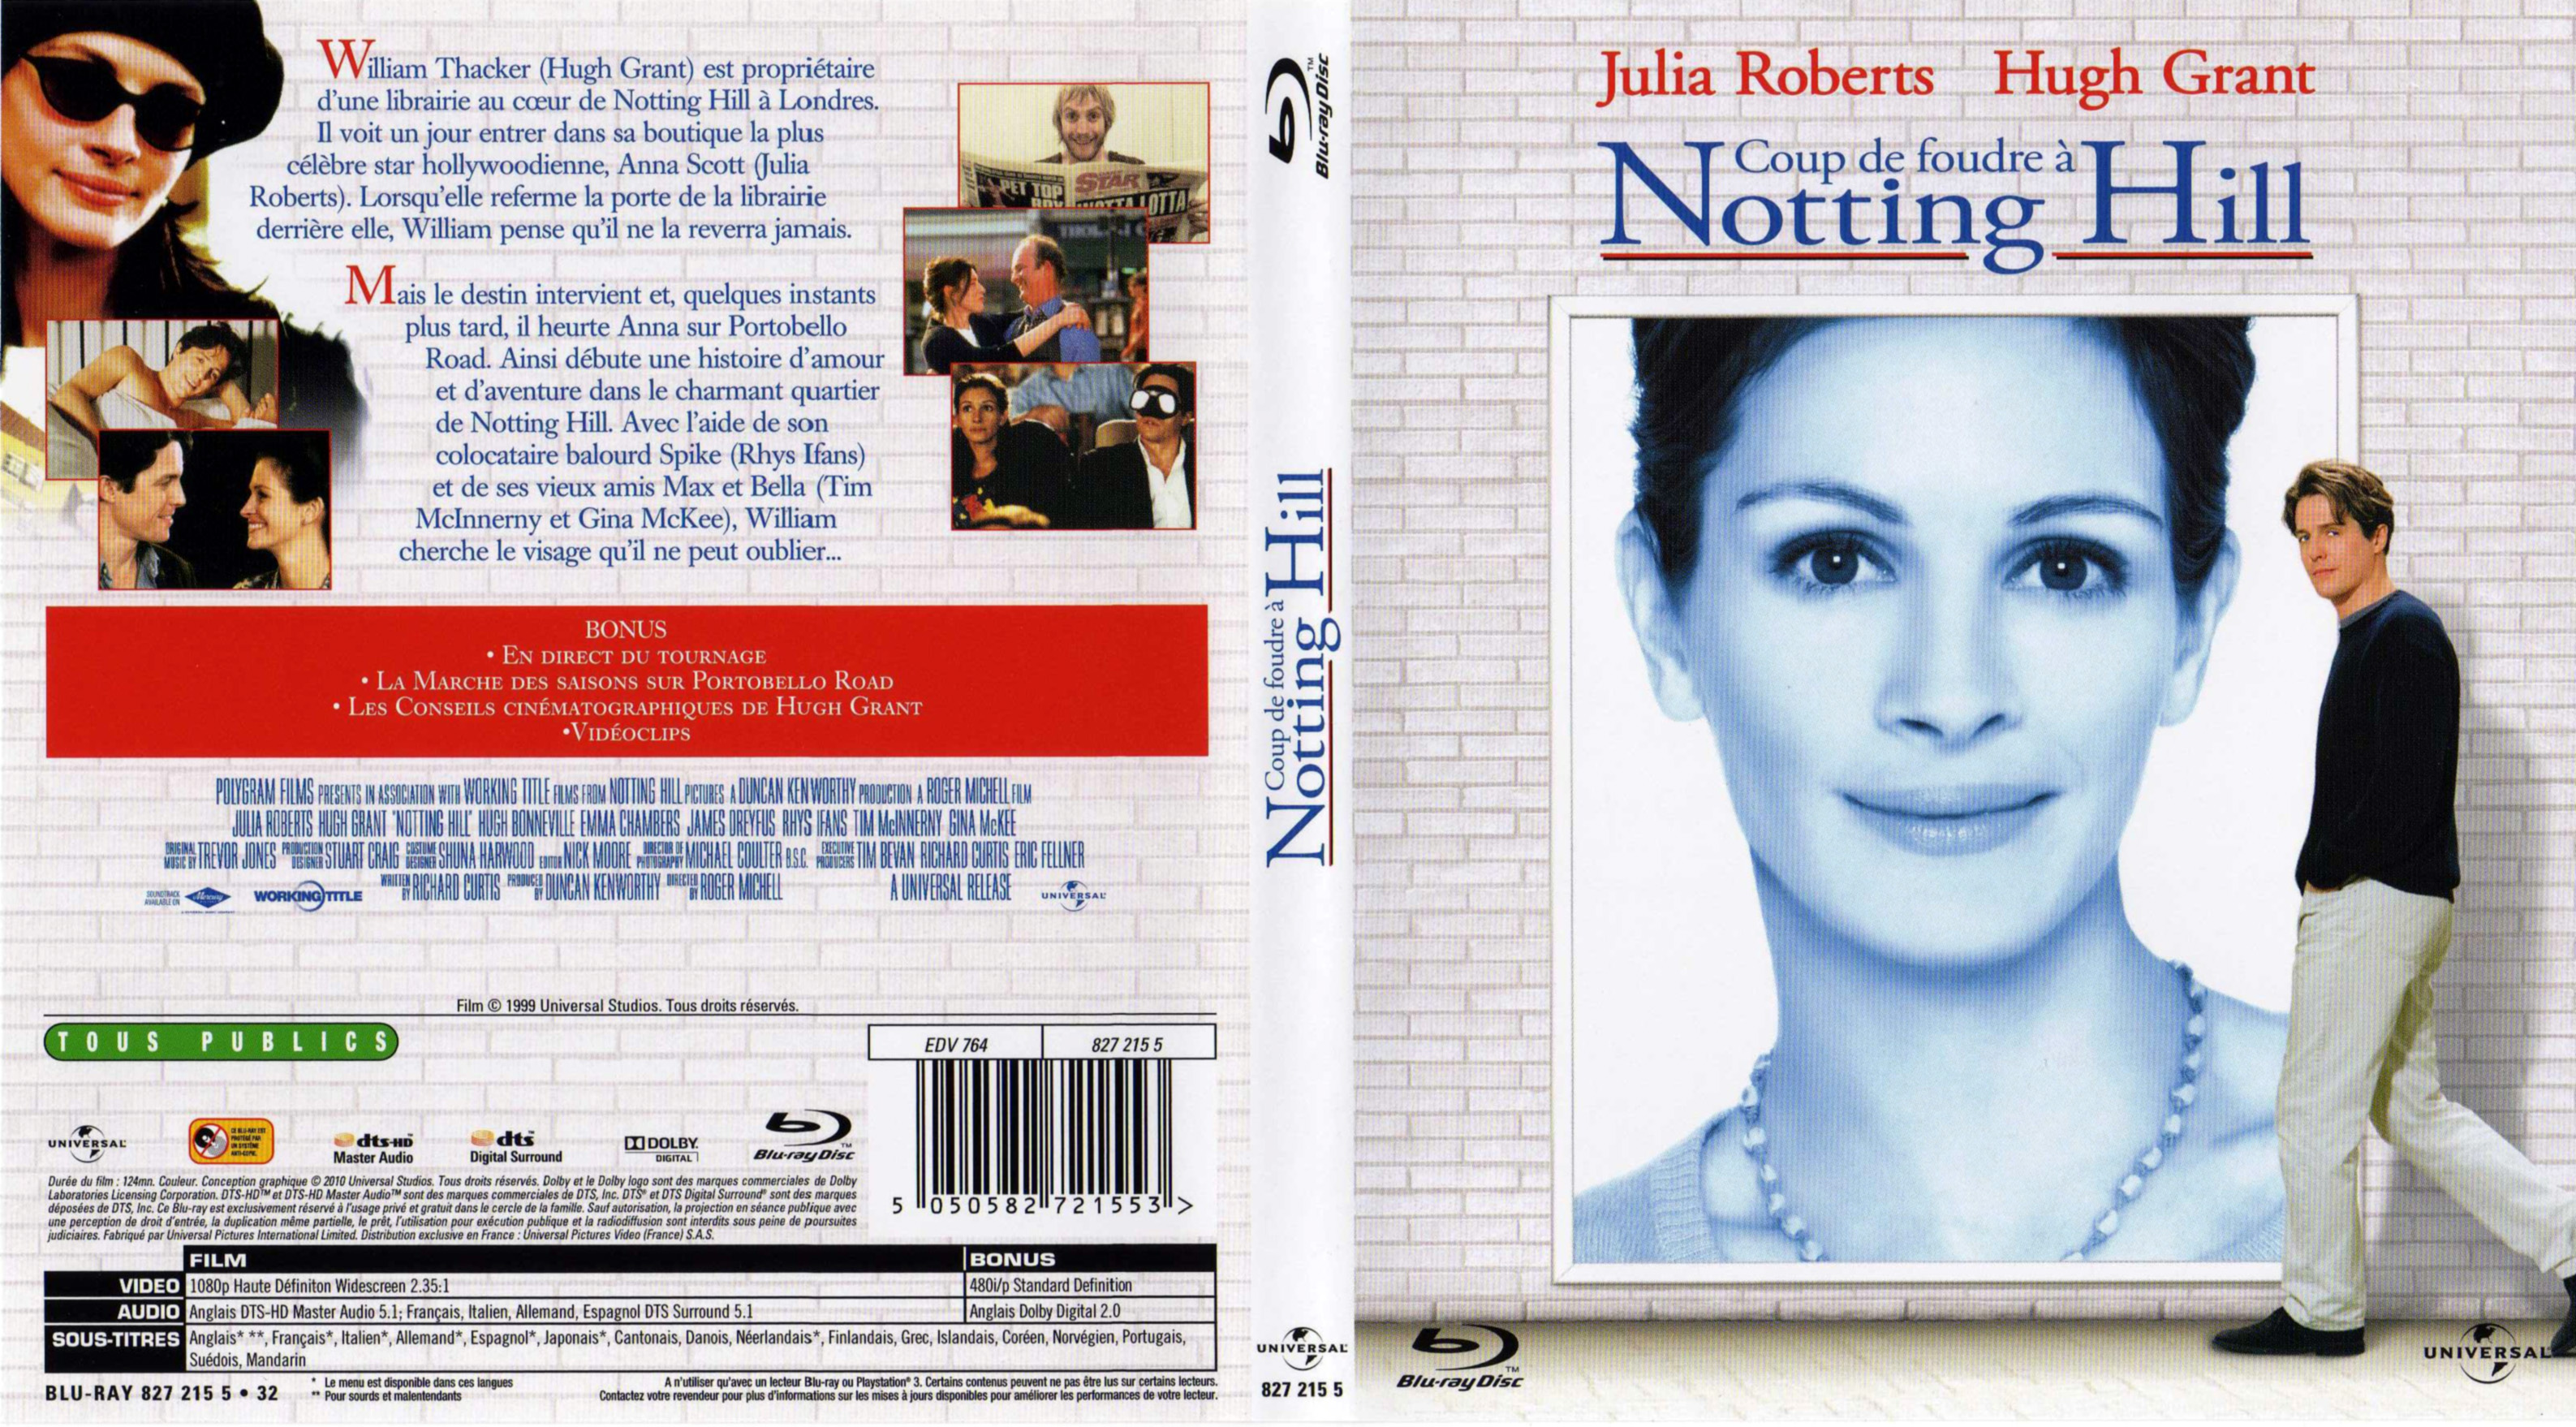 Jaquette DVD Coup de foudre  Notting Hill (BLU-RAY)